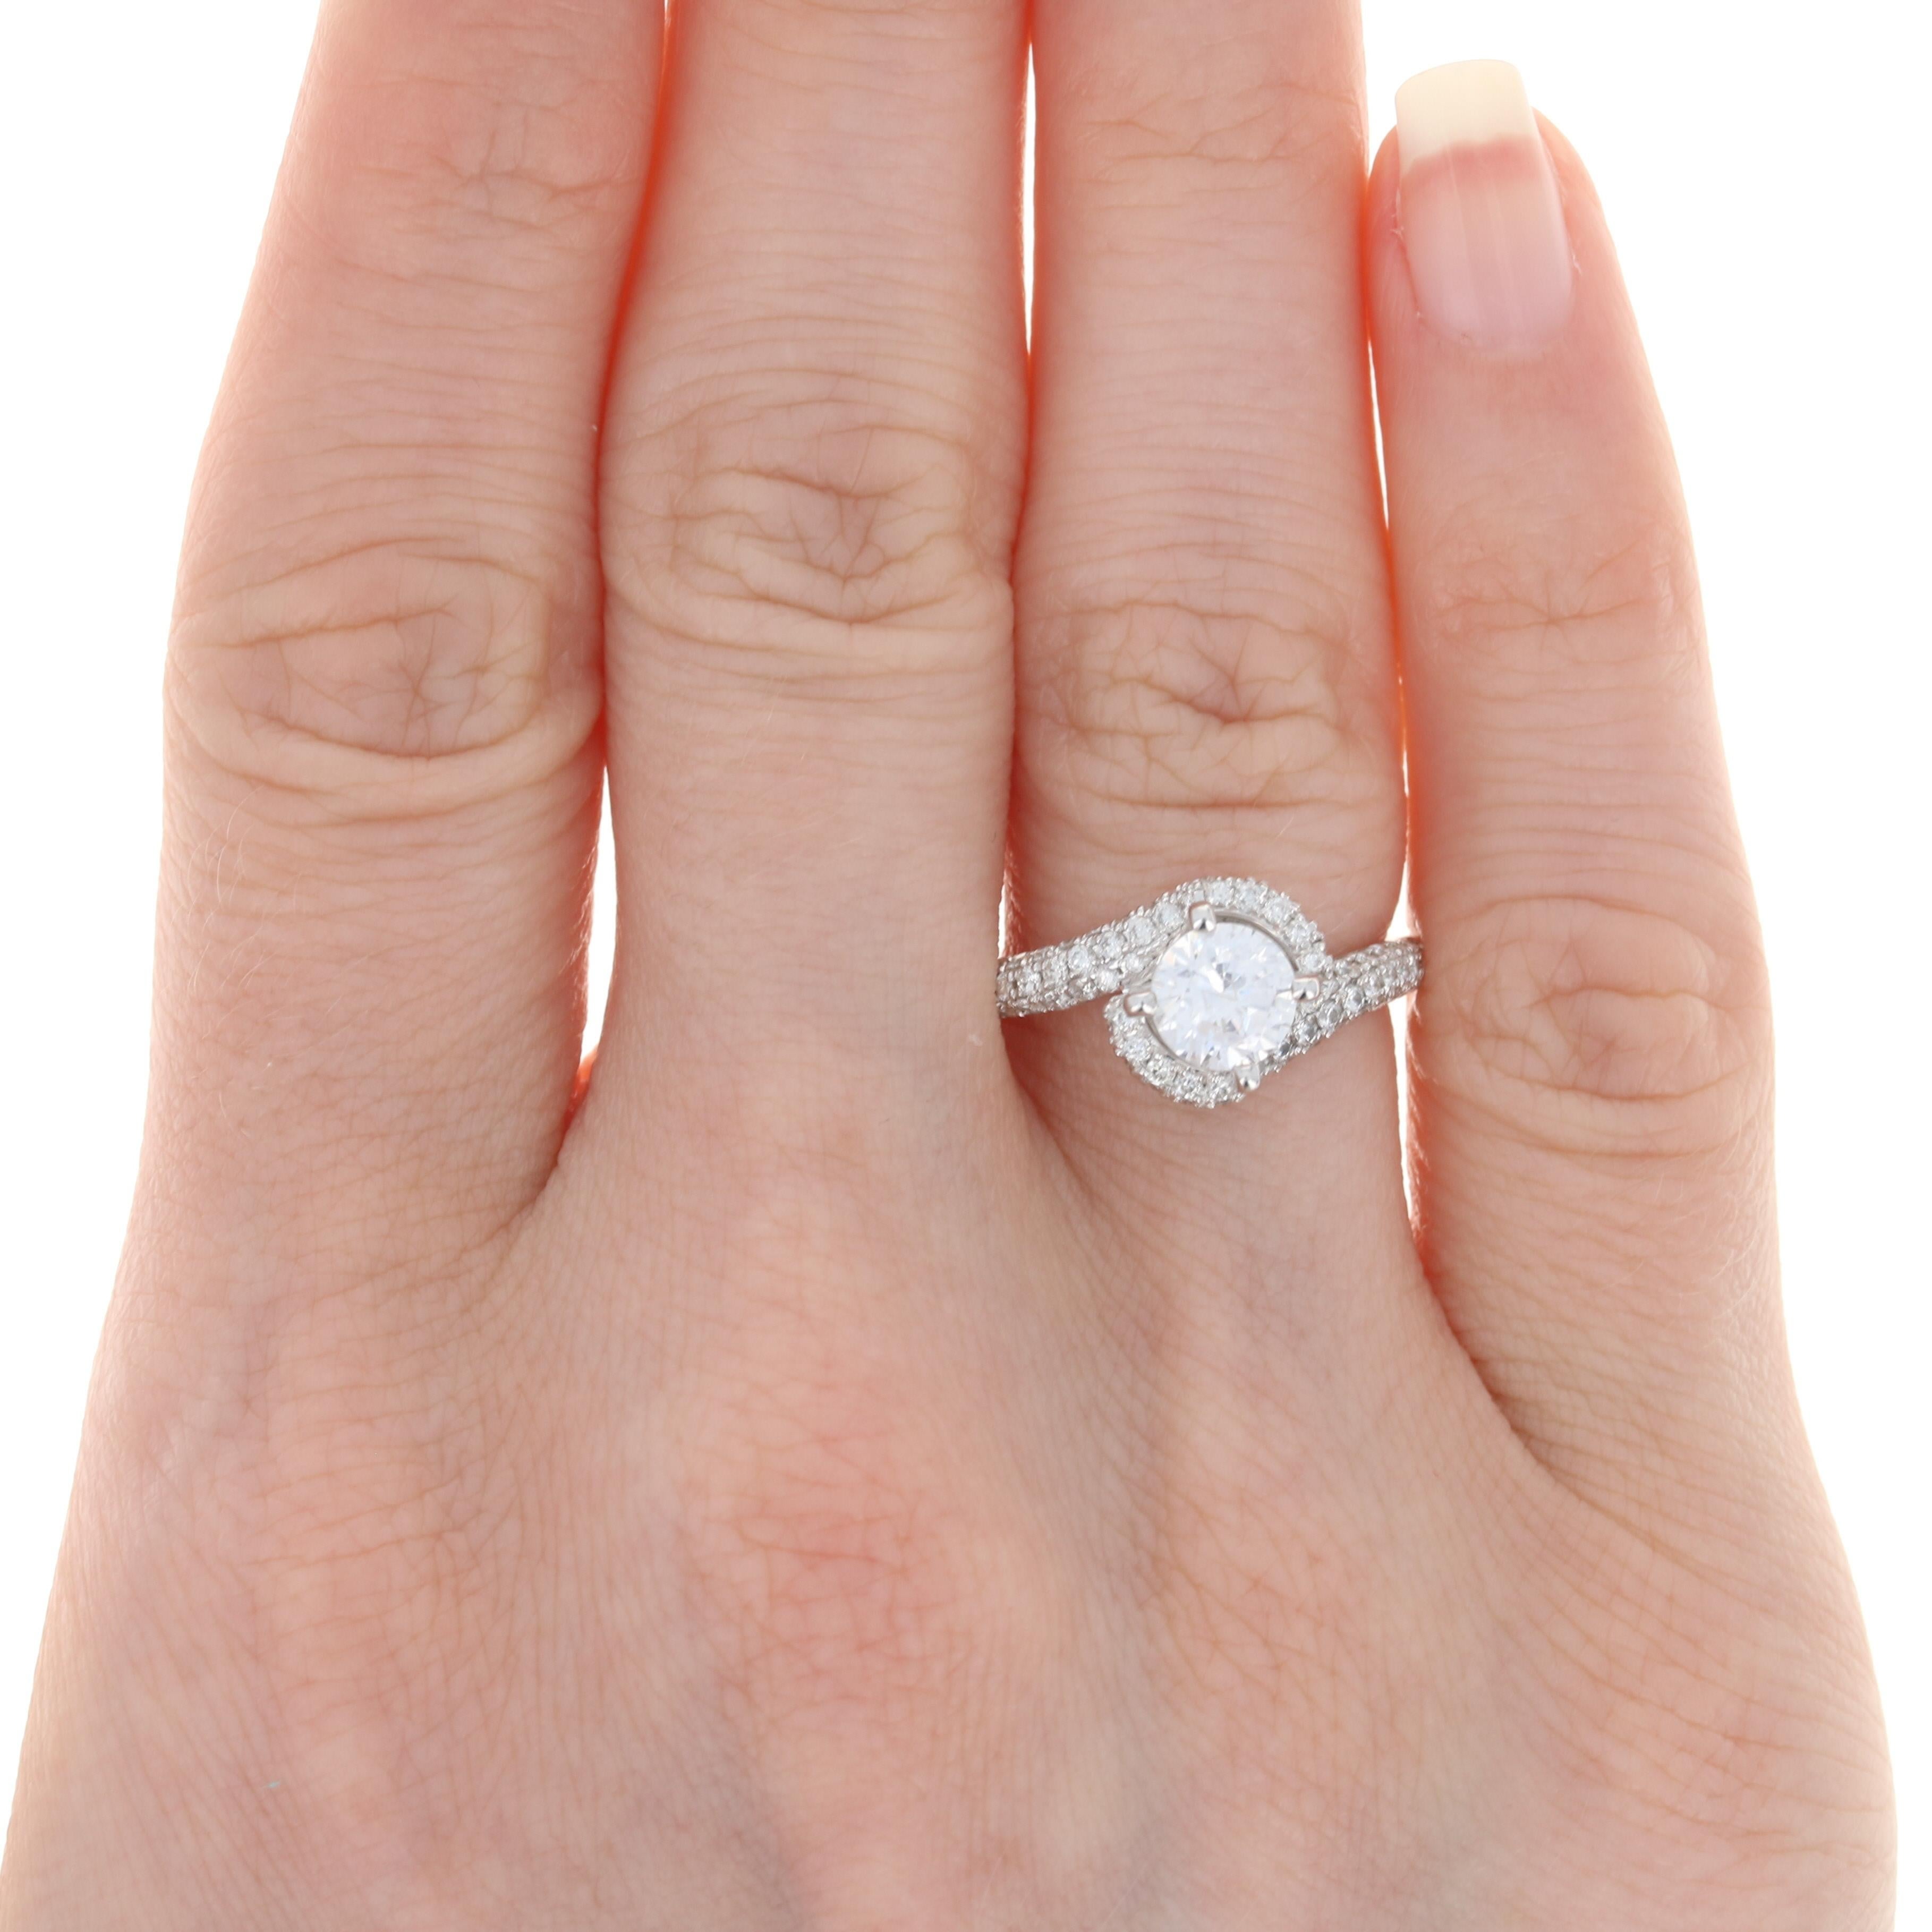 Showcase your perfect diamond solitaire or heirloom gemstone in this beautiful semi-mount engagement ring! Designed by Scott Kay in popular 14k white gold, this NEW bypass-style ring features a raised mounting that will accommodate a stone measuring